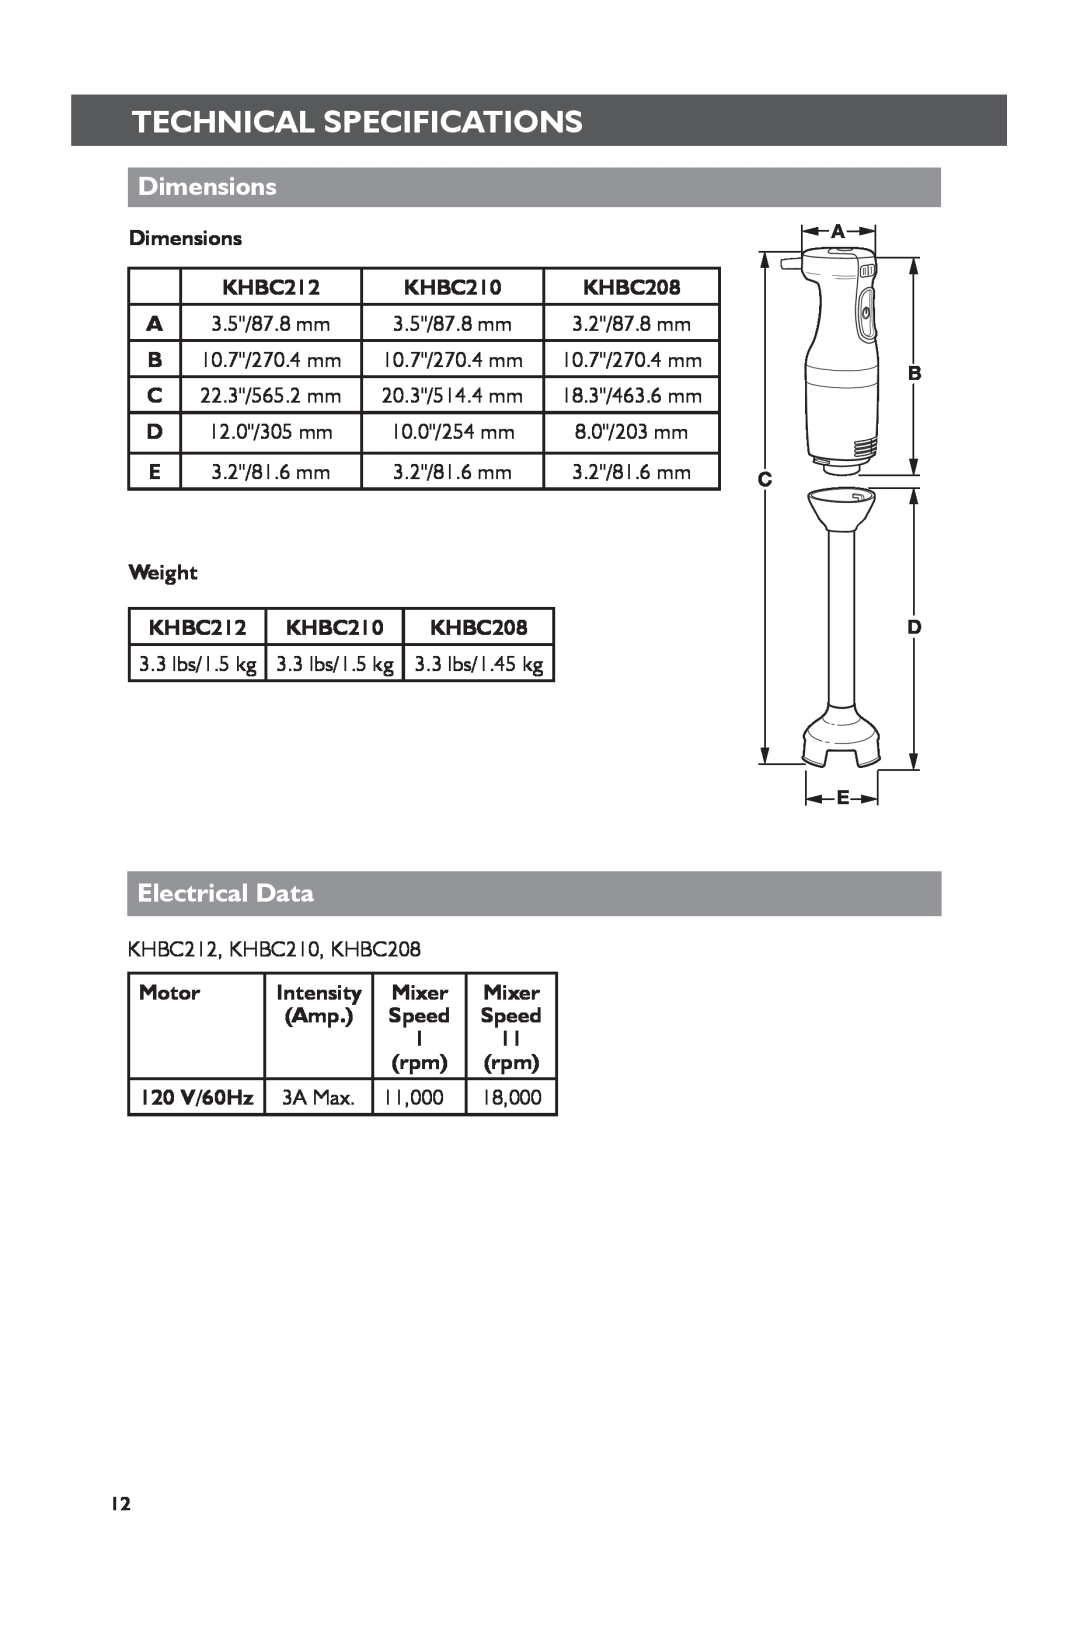 KitchenAid KHBC212 manual Technical Specifications, Dimensions, Electrical Data, KHBC210, KHBC208, Weight, Motor, Intensity 